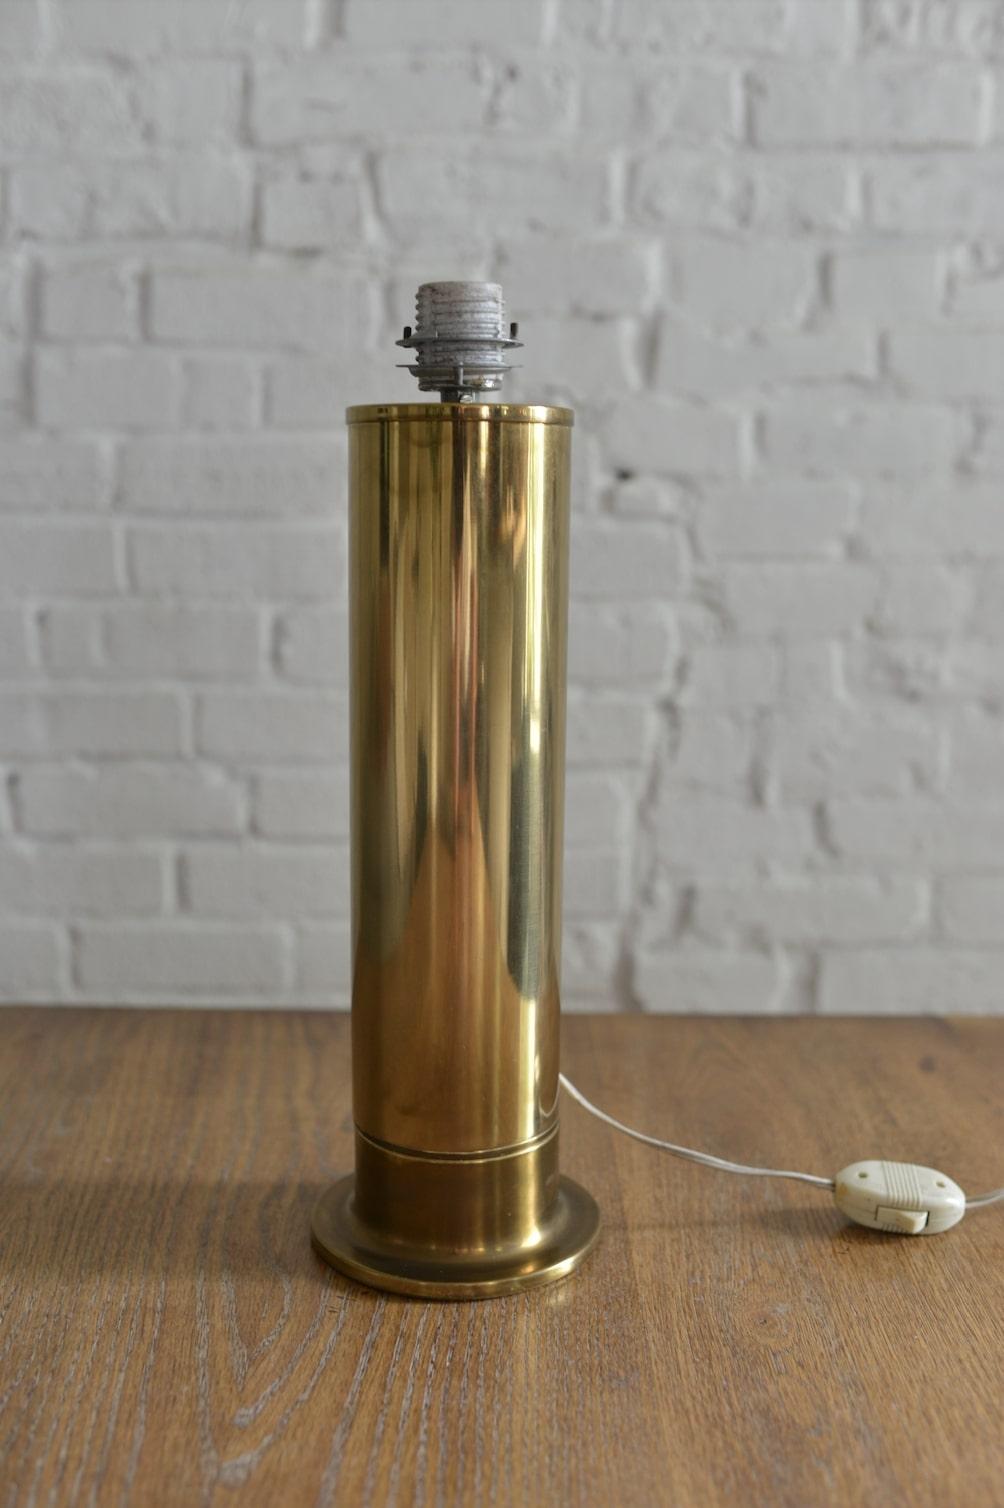 Original all brass Hans Agne Jakobsson for AB Markaryd table lamp made in Sweden. Features a tall brass column form, ceramic standard socket and original cord. The fixture works and is in fantastic vintage condition. Original red shade included but